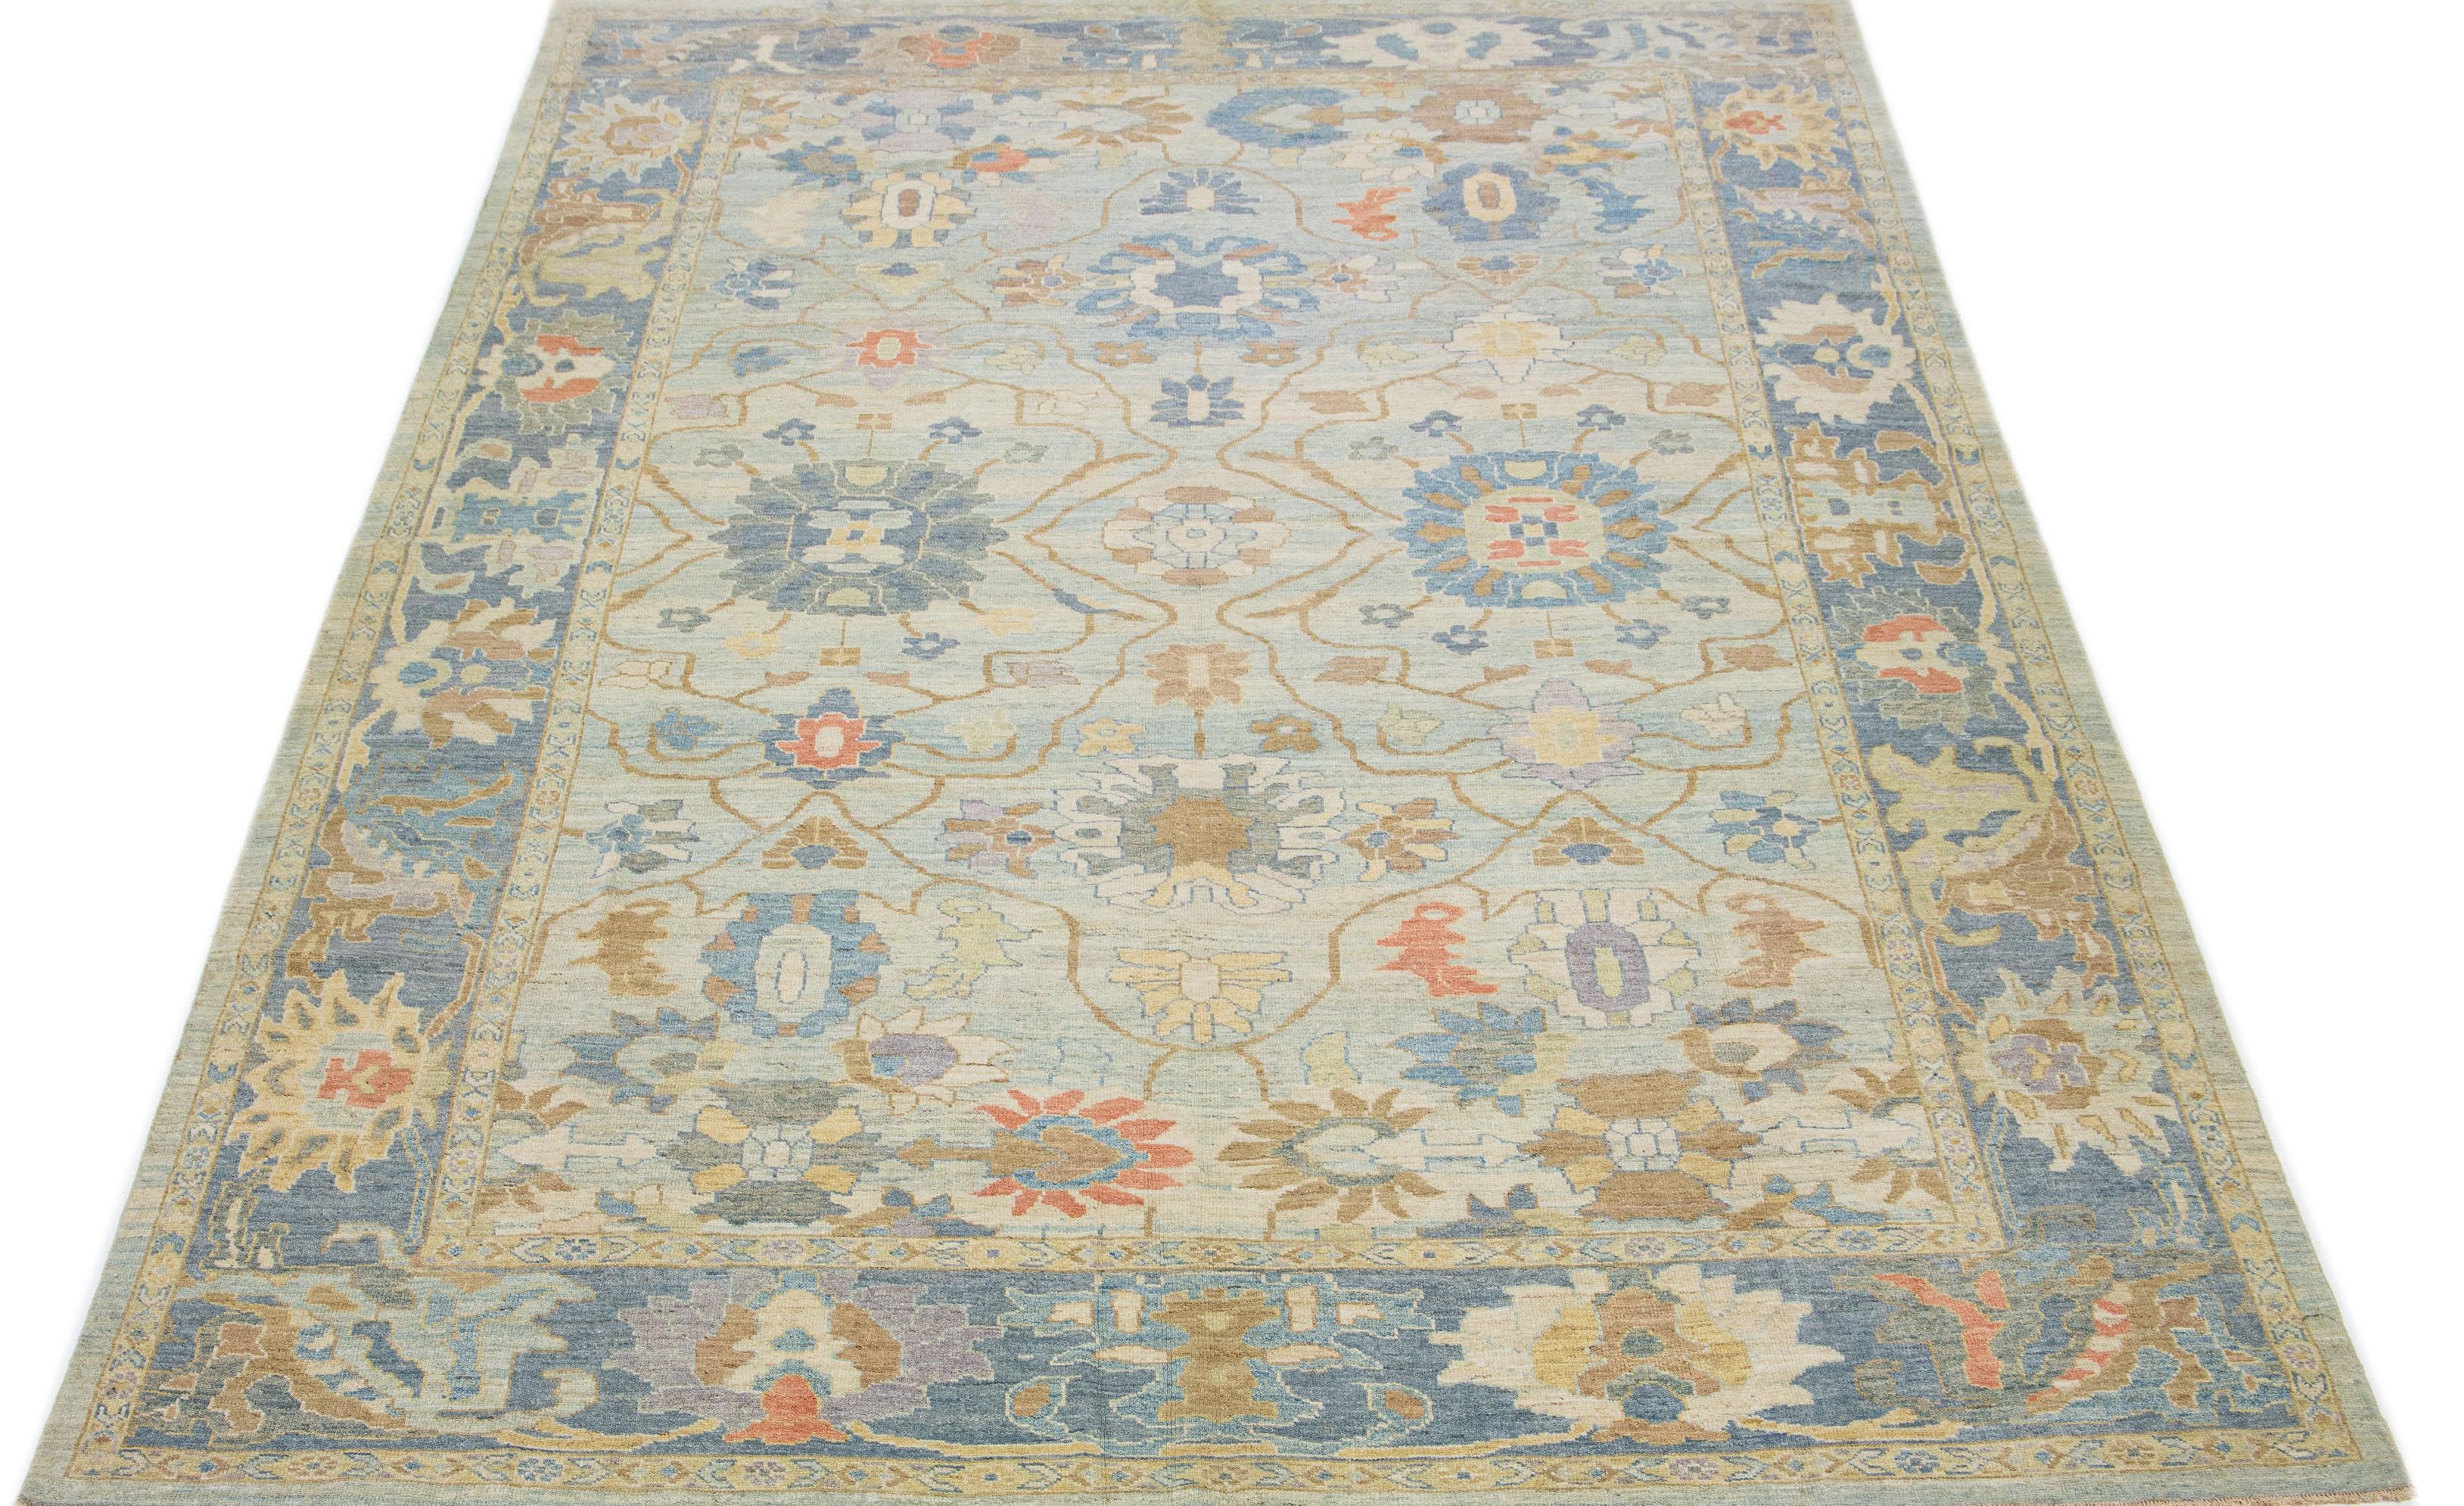 This contemporary take on the traditional Sultanabad style is showcased in an exquisite hand-knotted wool rug with a striking light blue color. An intricately designed blue frame accentuates its all-over floral motif, adorned with multicolored